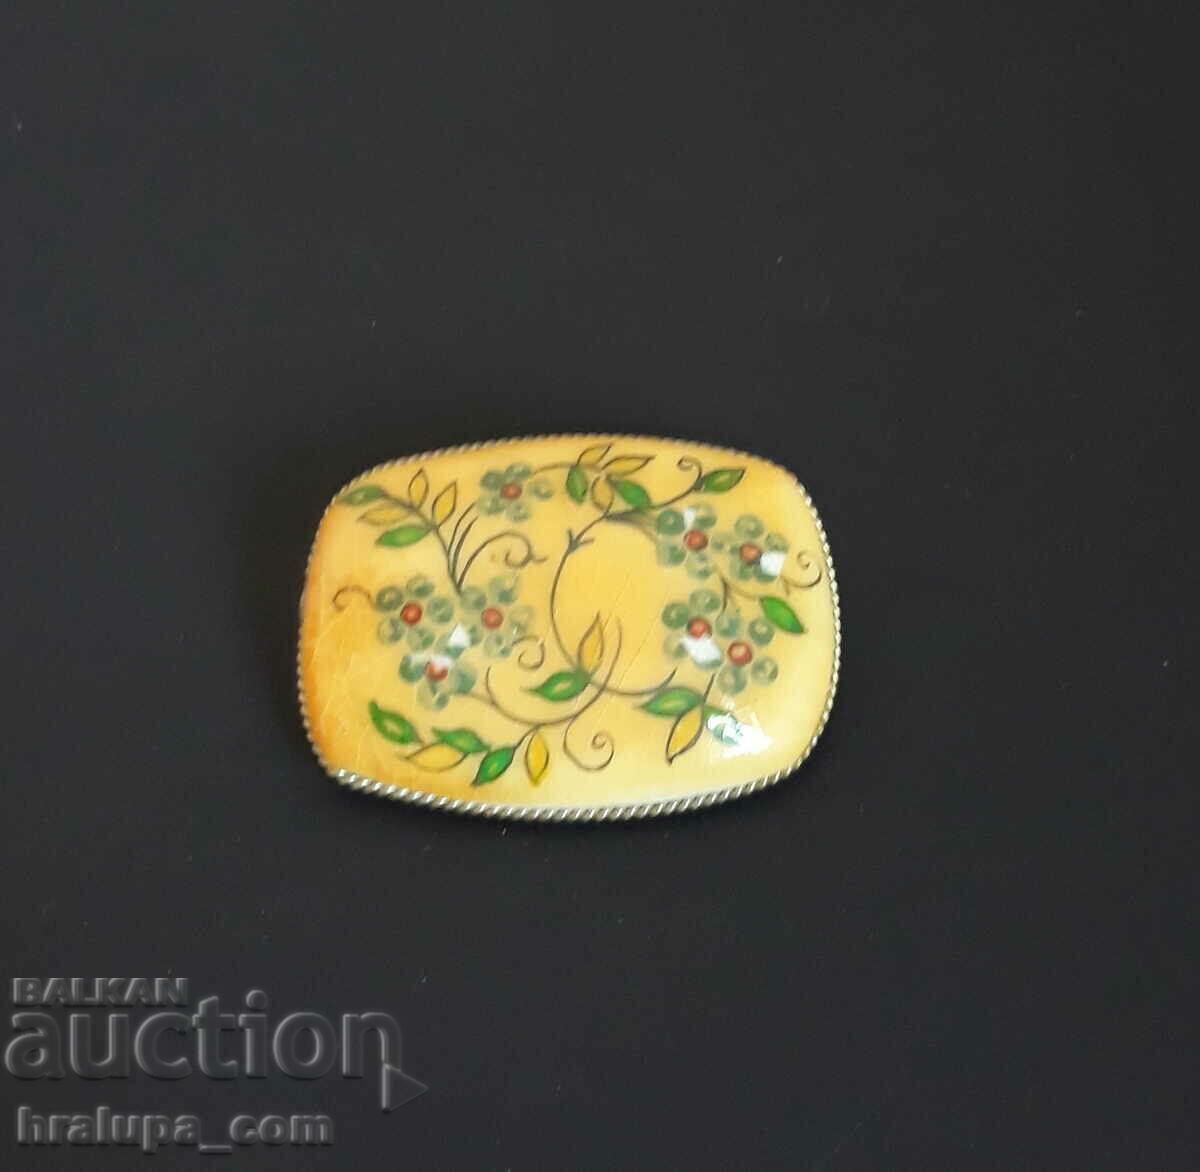 Old hand-painted stone brooch